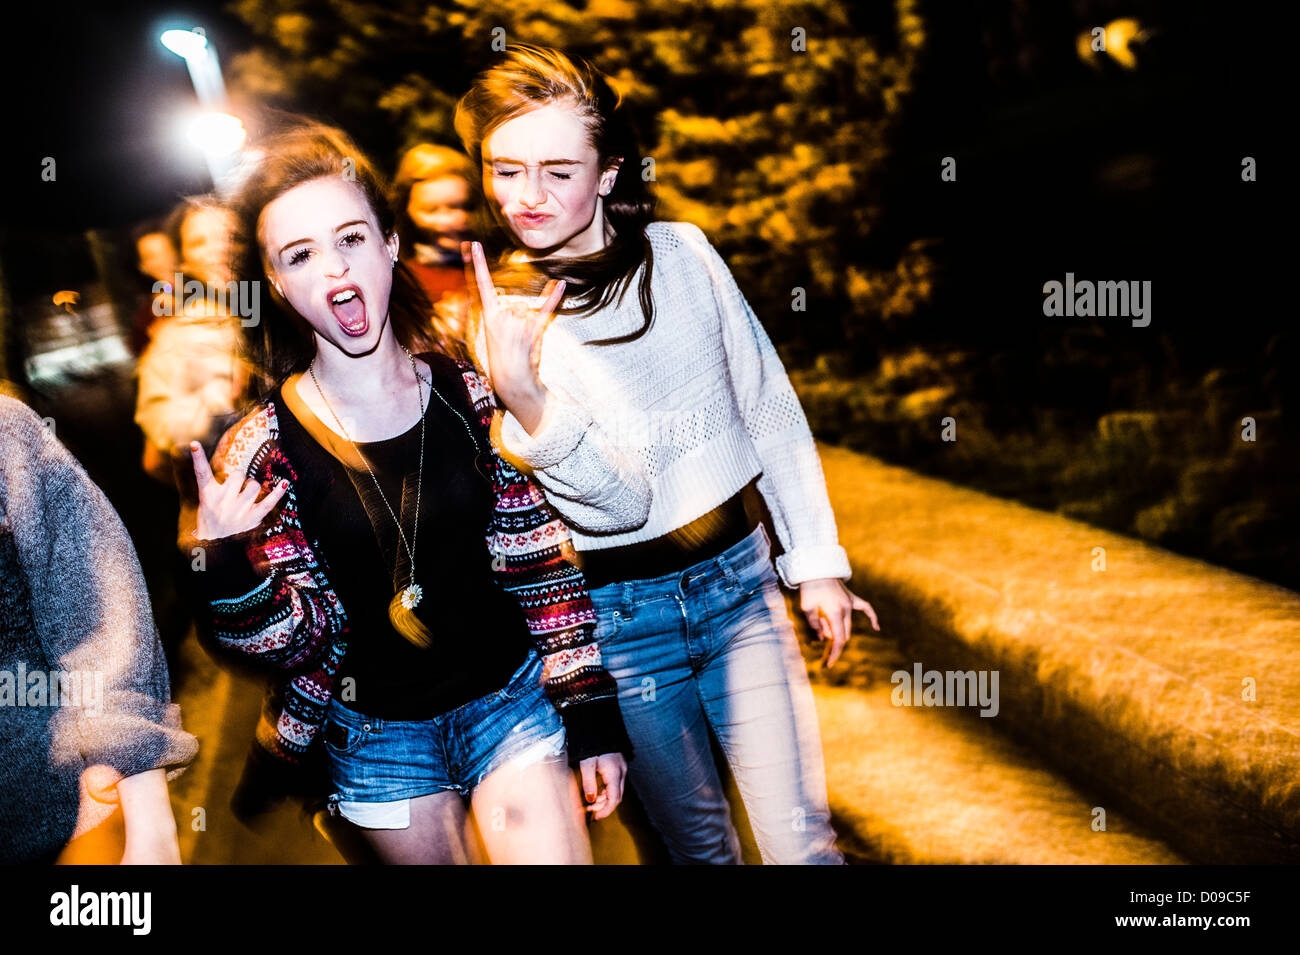 A group of 14 15 year old teenage girls friends with attitude together laughing having fun outside at night UK Stock Photo